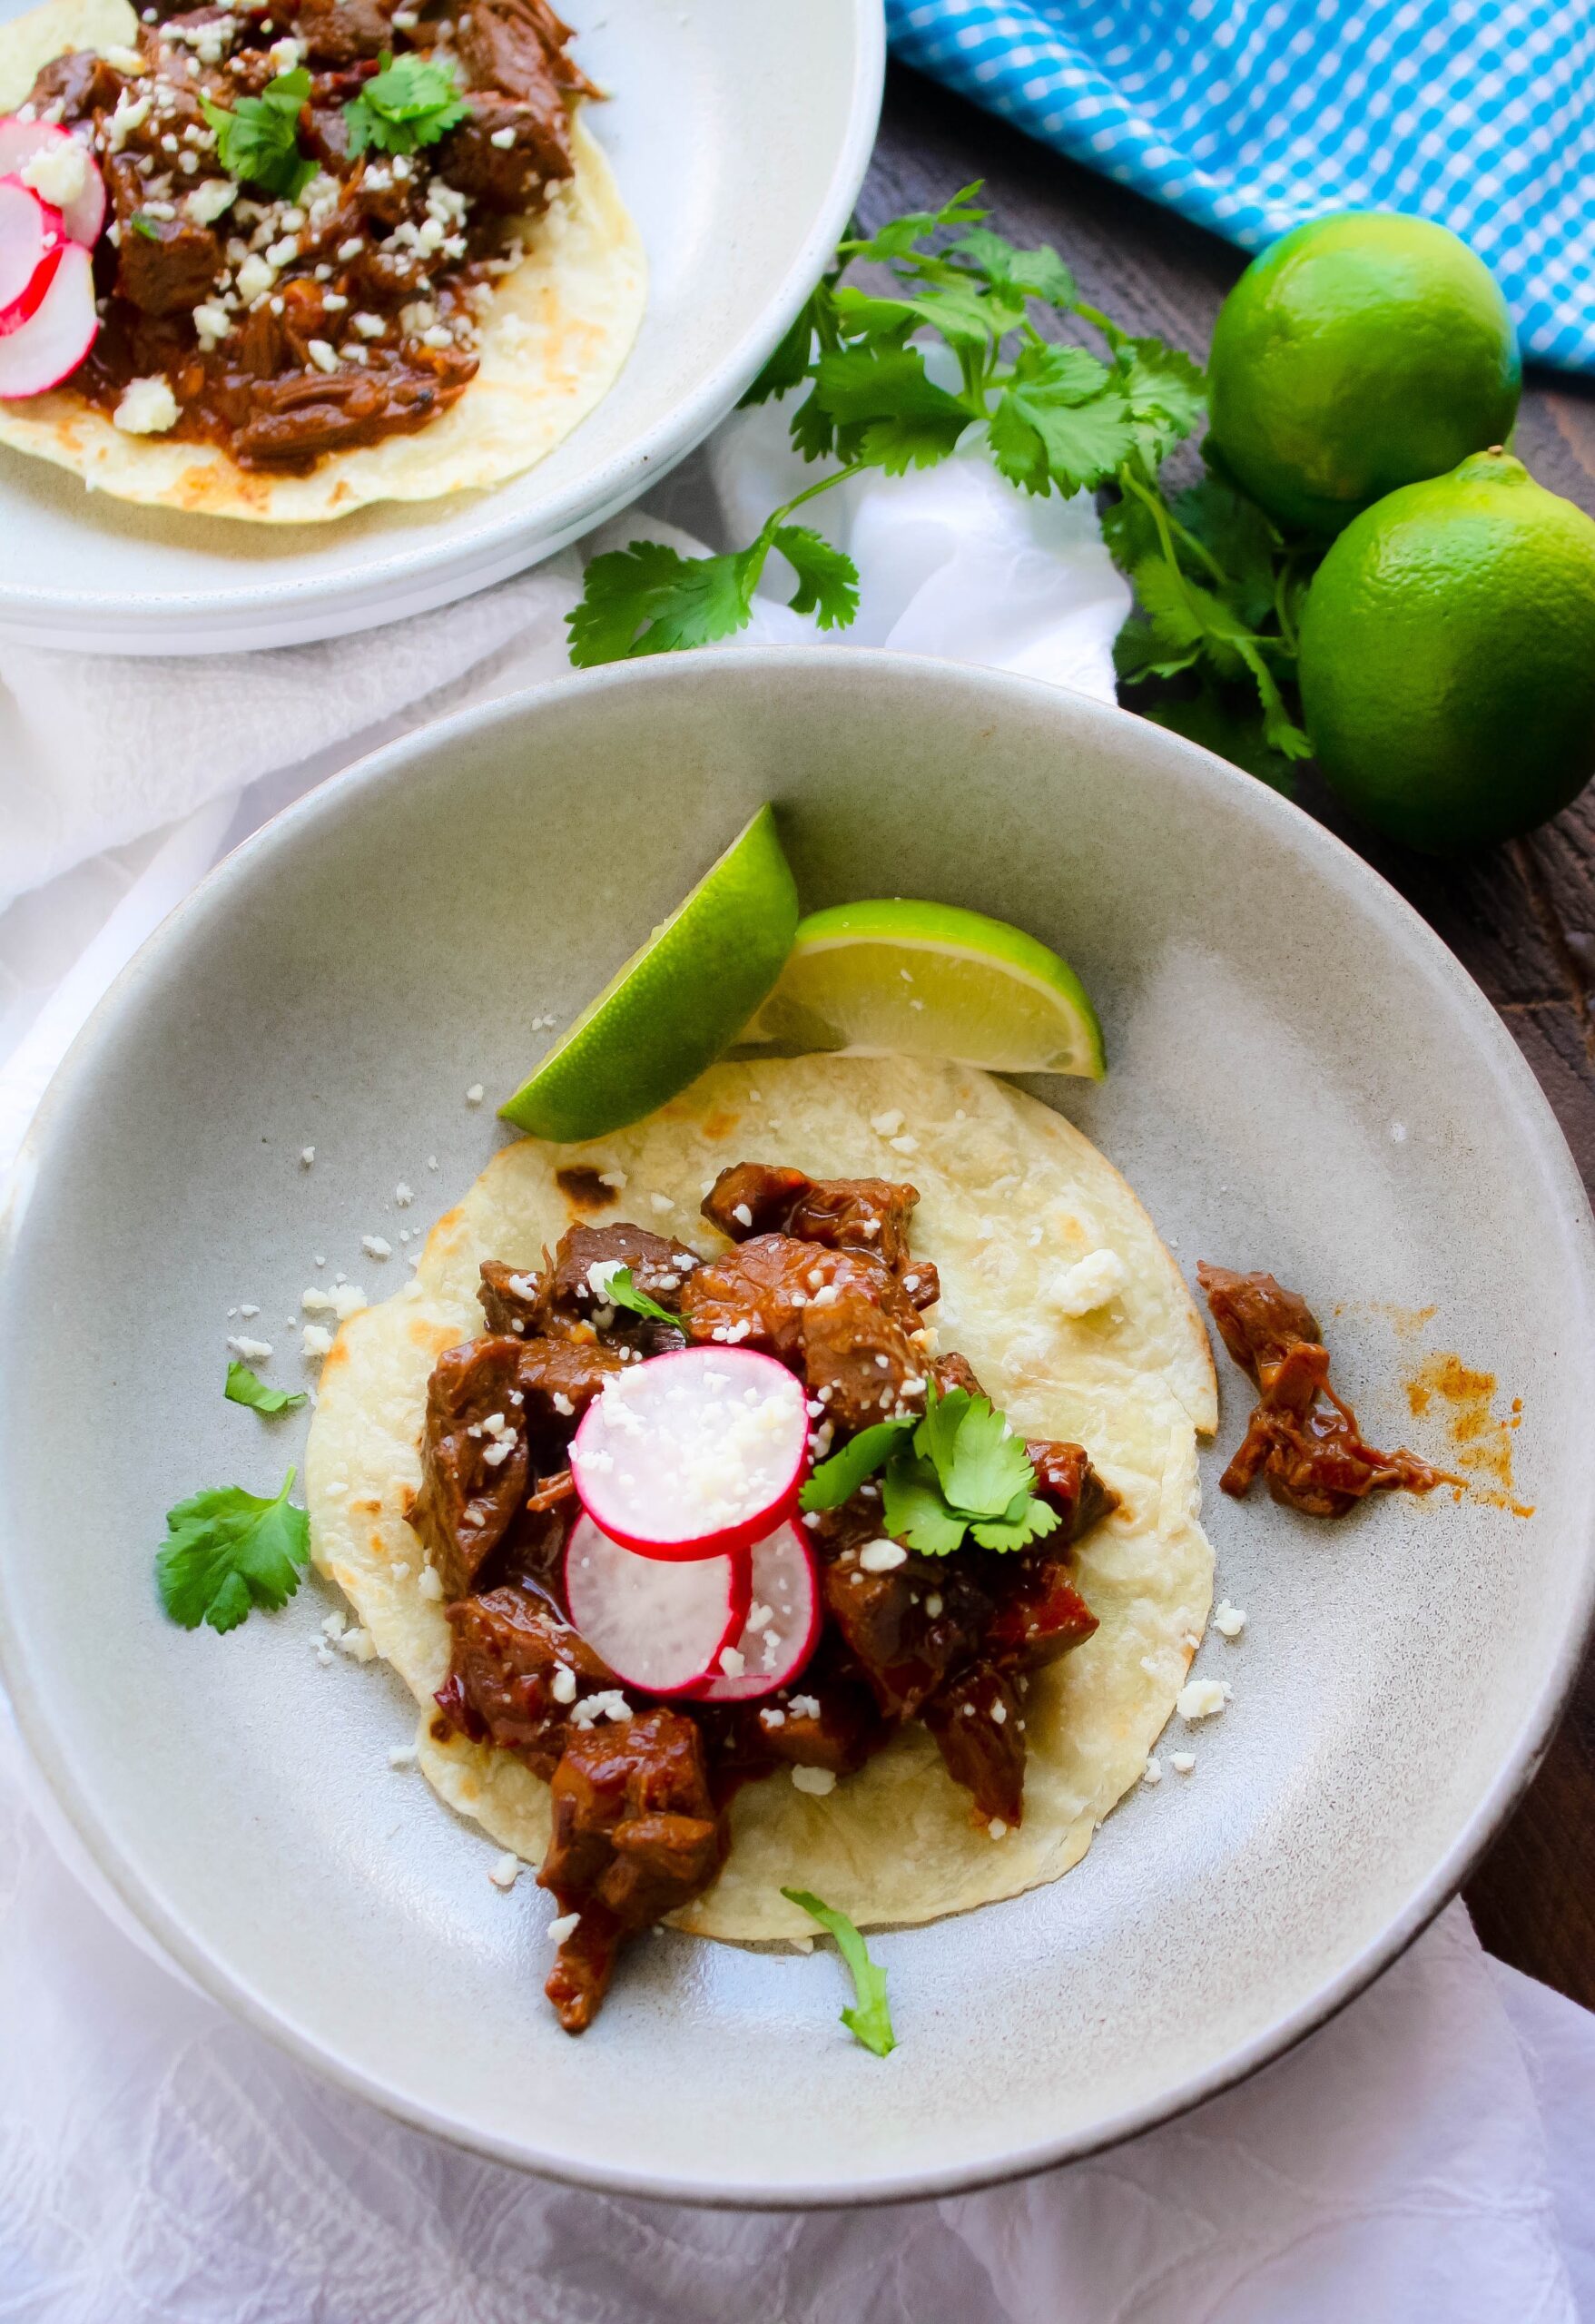 Chile Colorado Tacos make an amazing meal! Serve up Chile Colorado Tacos any nigh of the week!